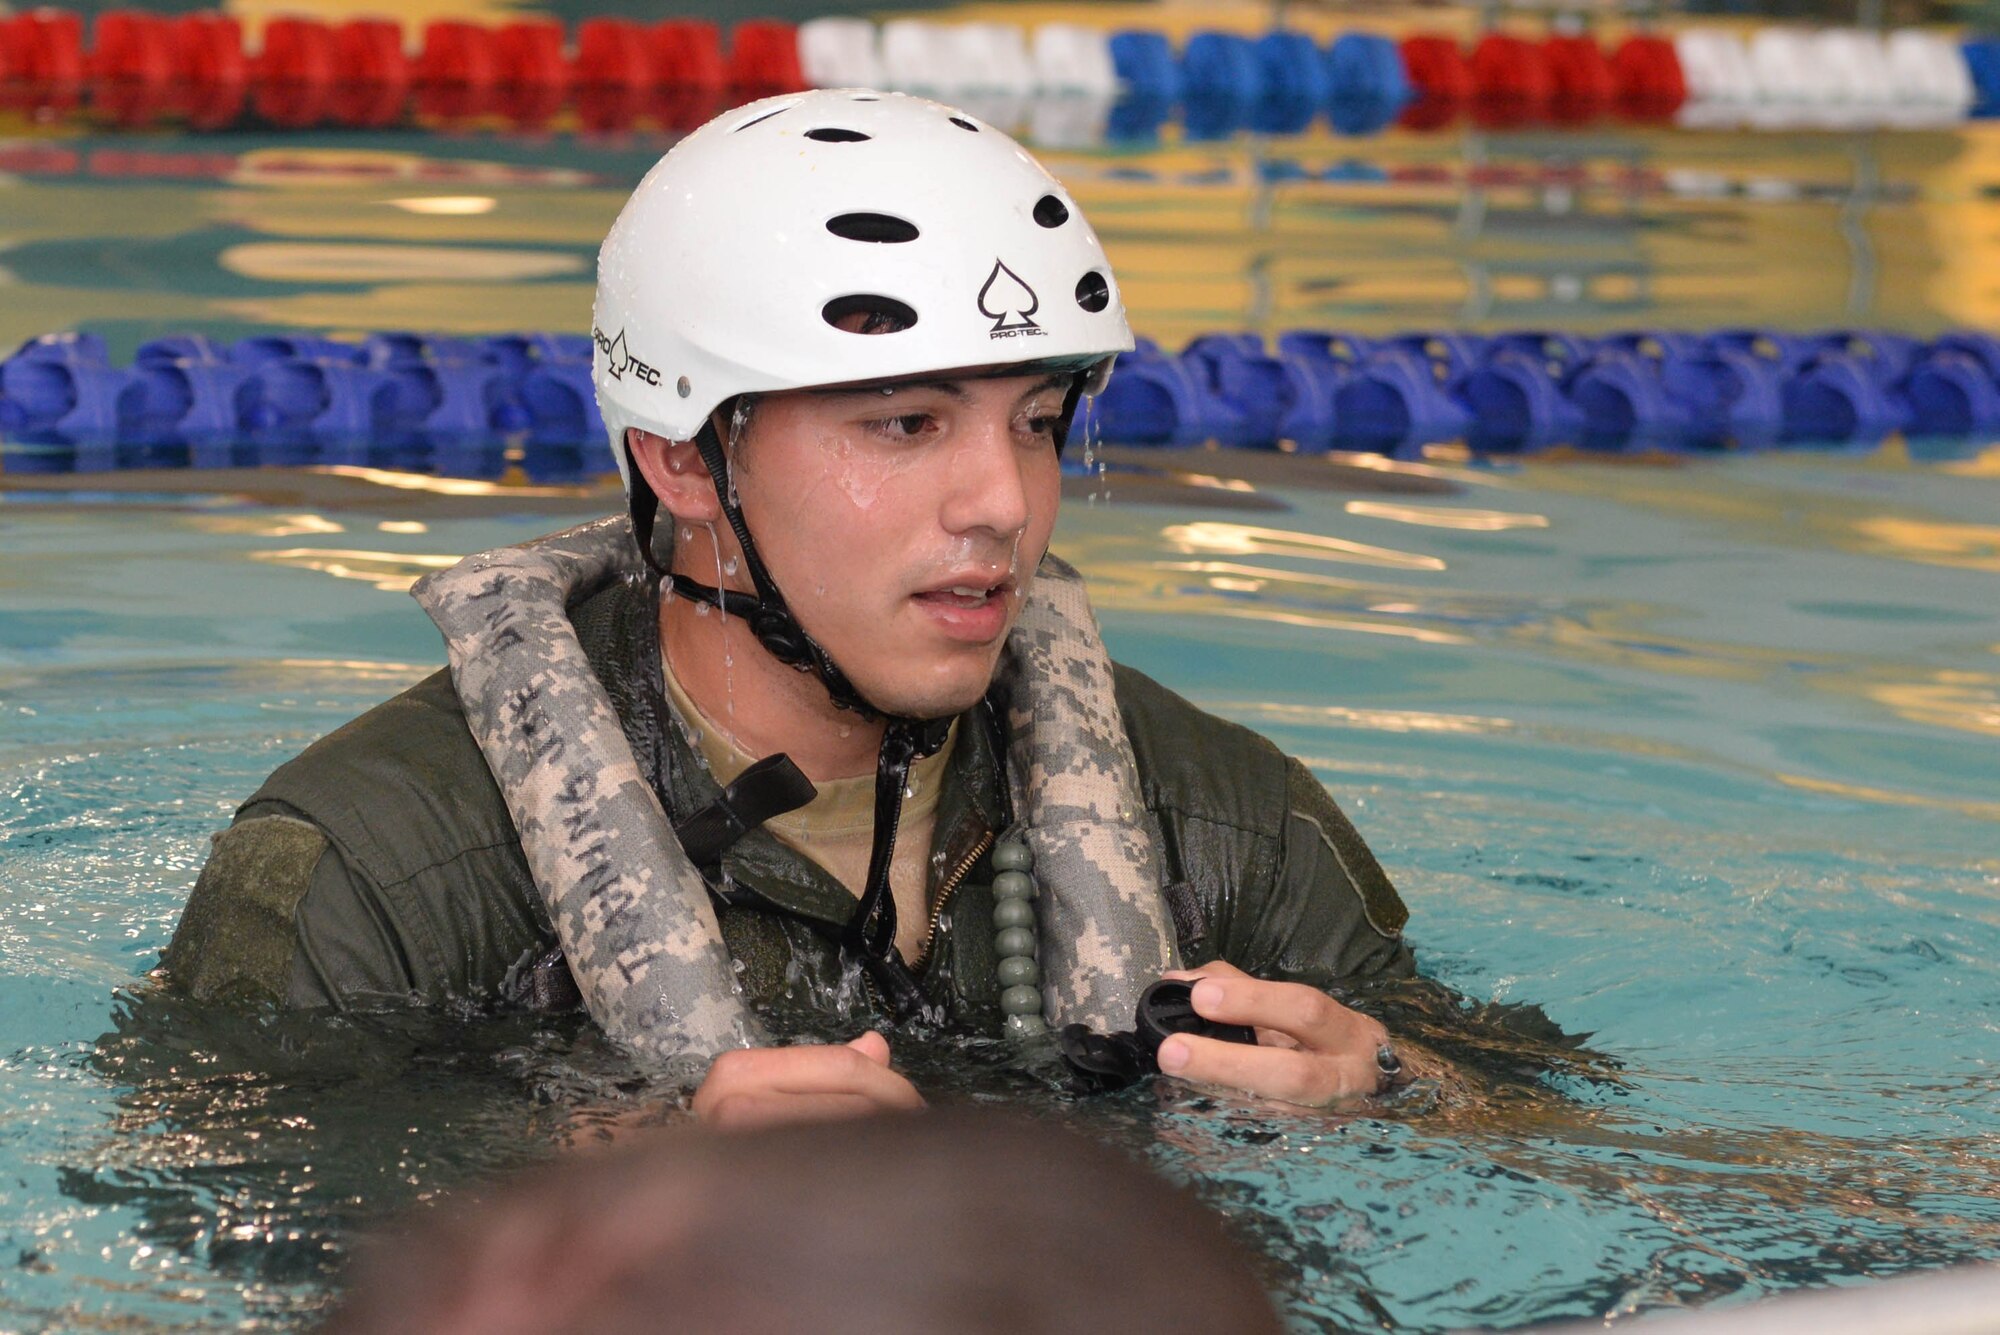 Staff Sgt. Manuel Salazar, a flight engineer assigned to the 54th Helicopter Squadron, emerges from the water during survival, evasion, resistance and escape  egress training at the McAdoo Fitness Center at Minot Air Force Base, N.D., Aug. 31, 2016. Underwater egress training prepares Airmen for escape during a potential crash into water. (U.S. Air Force photo/Airman 1st Class Jessica Weissman)